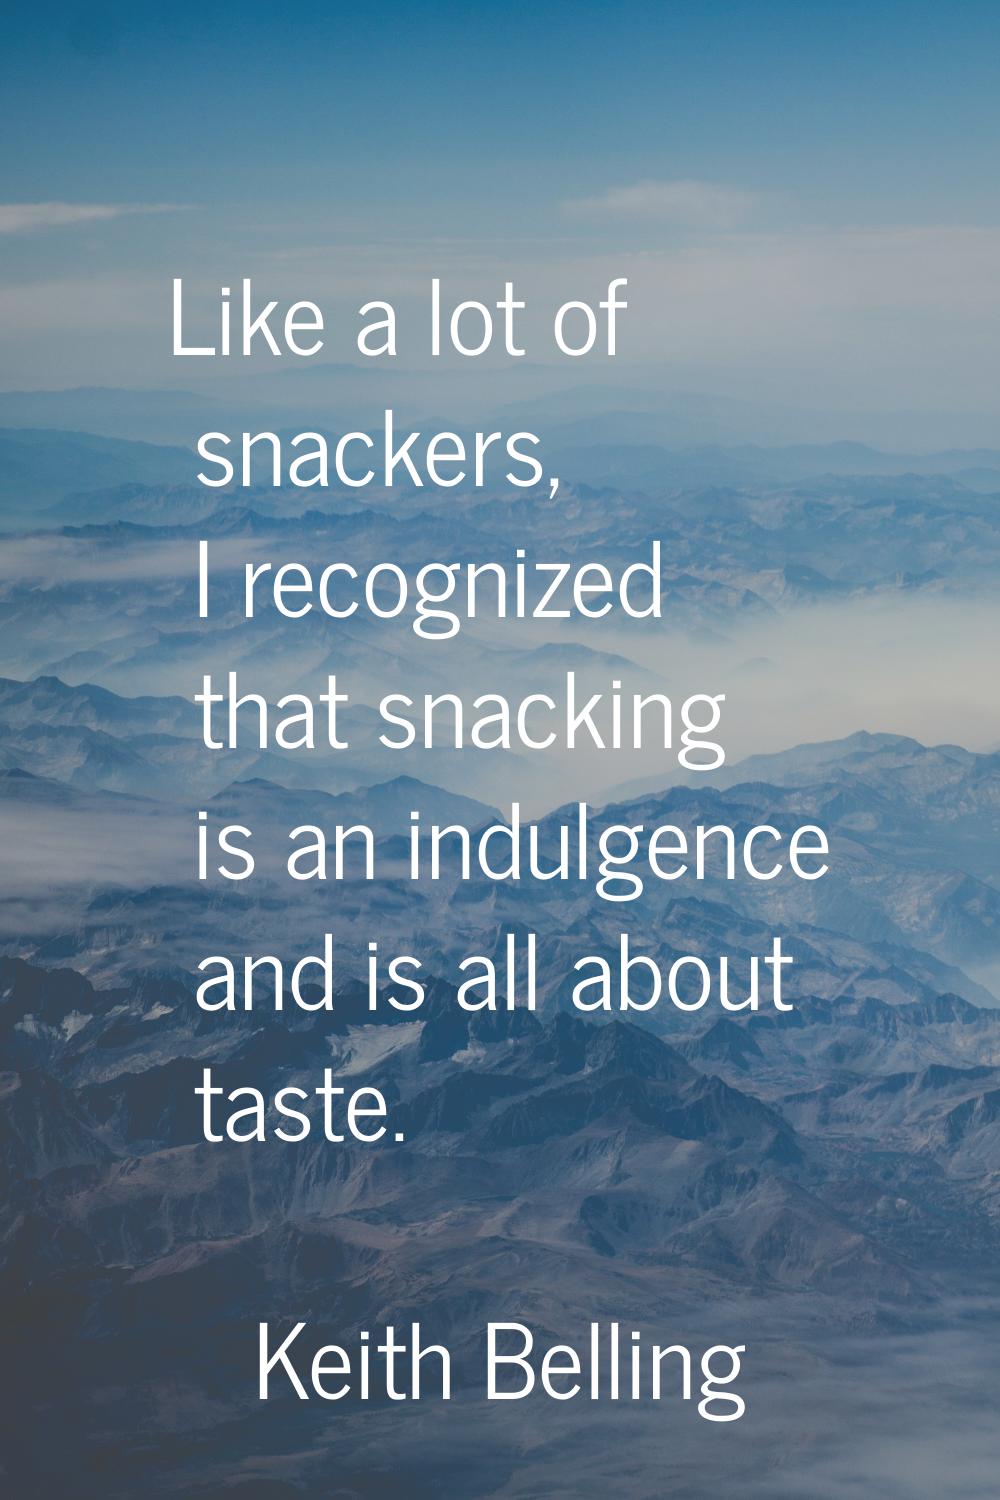 Like a lot of snackers, I recognized that snacking is an indulgence and is all about taste.